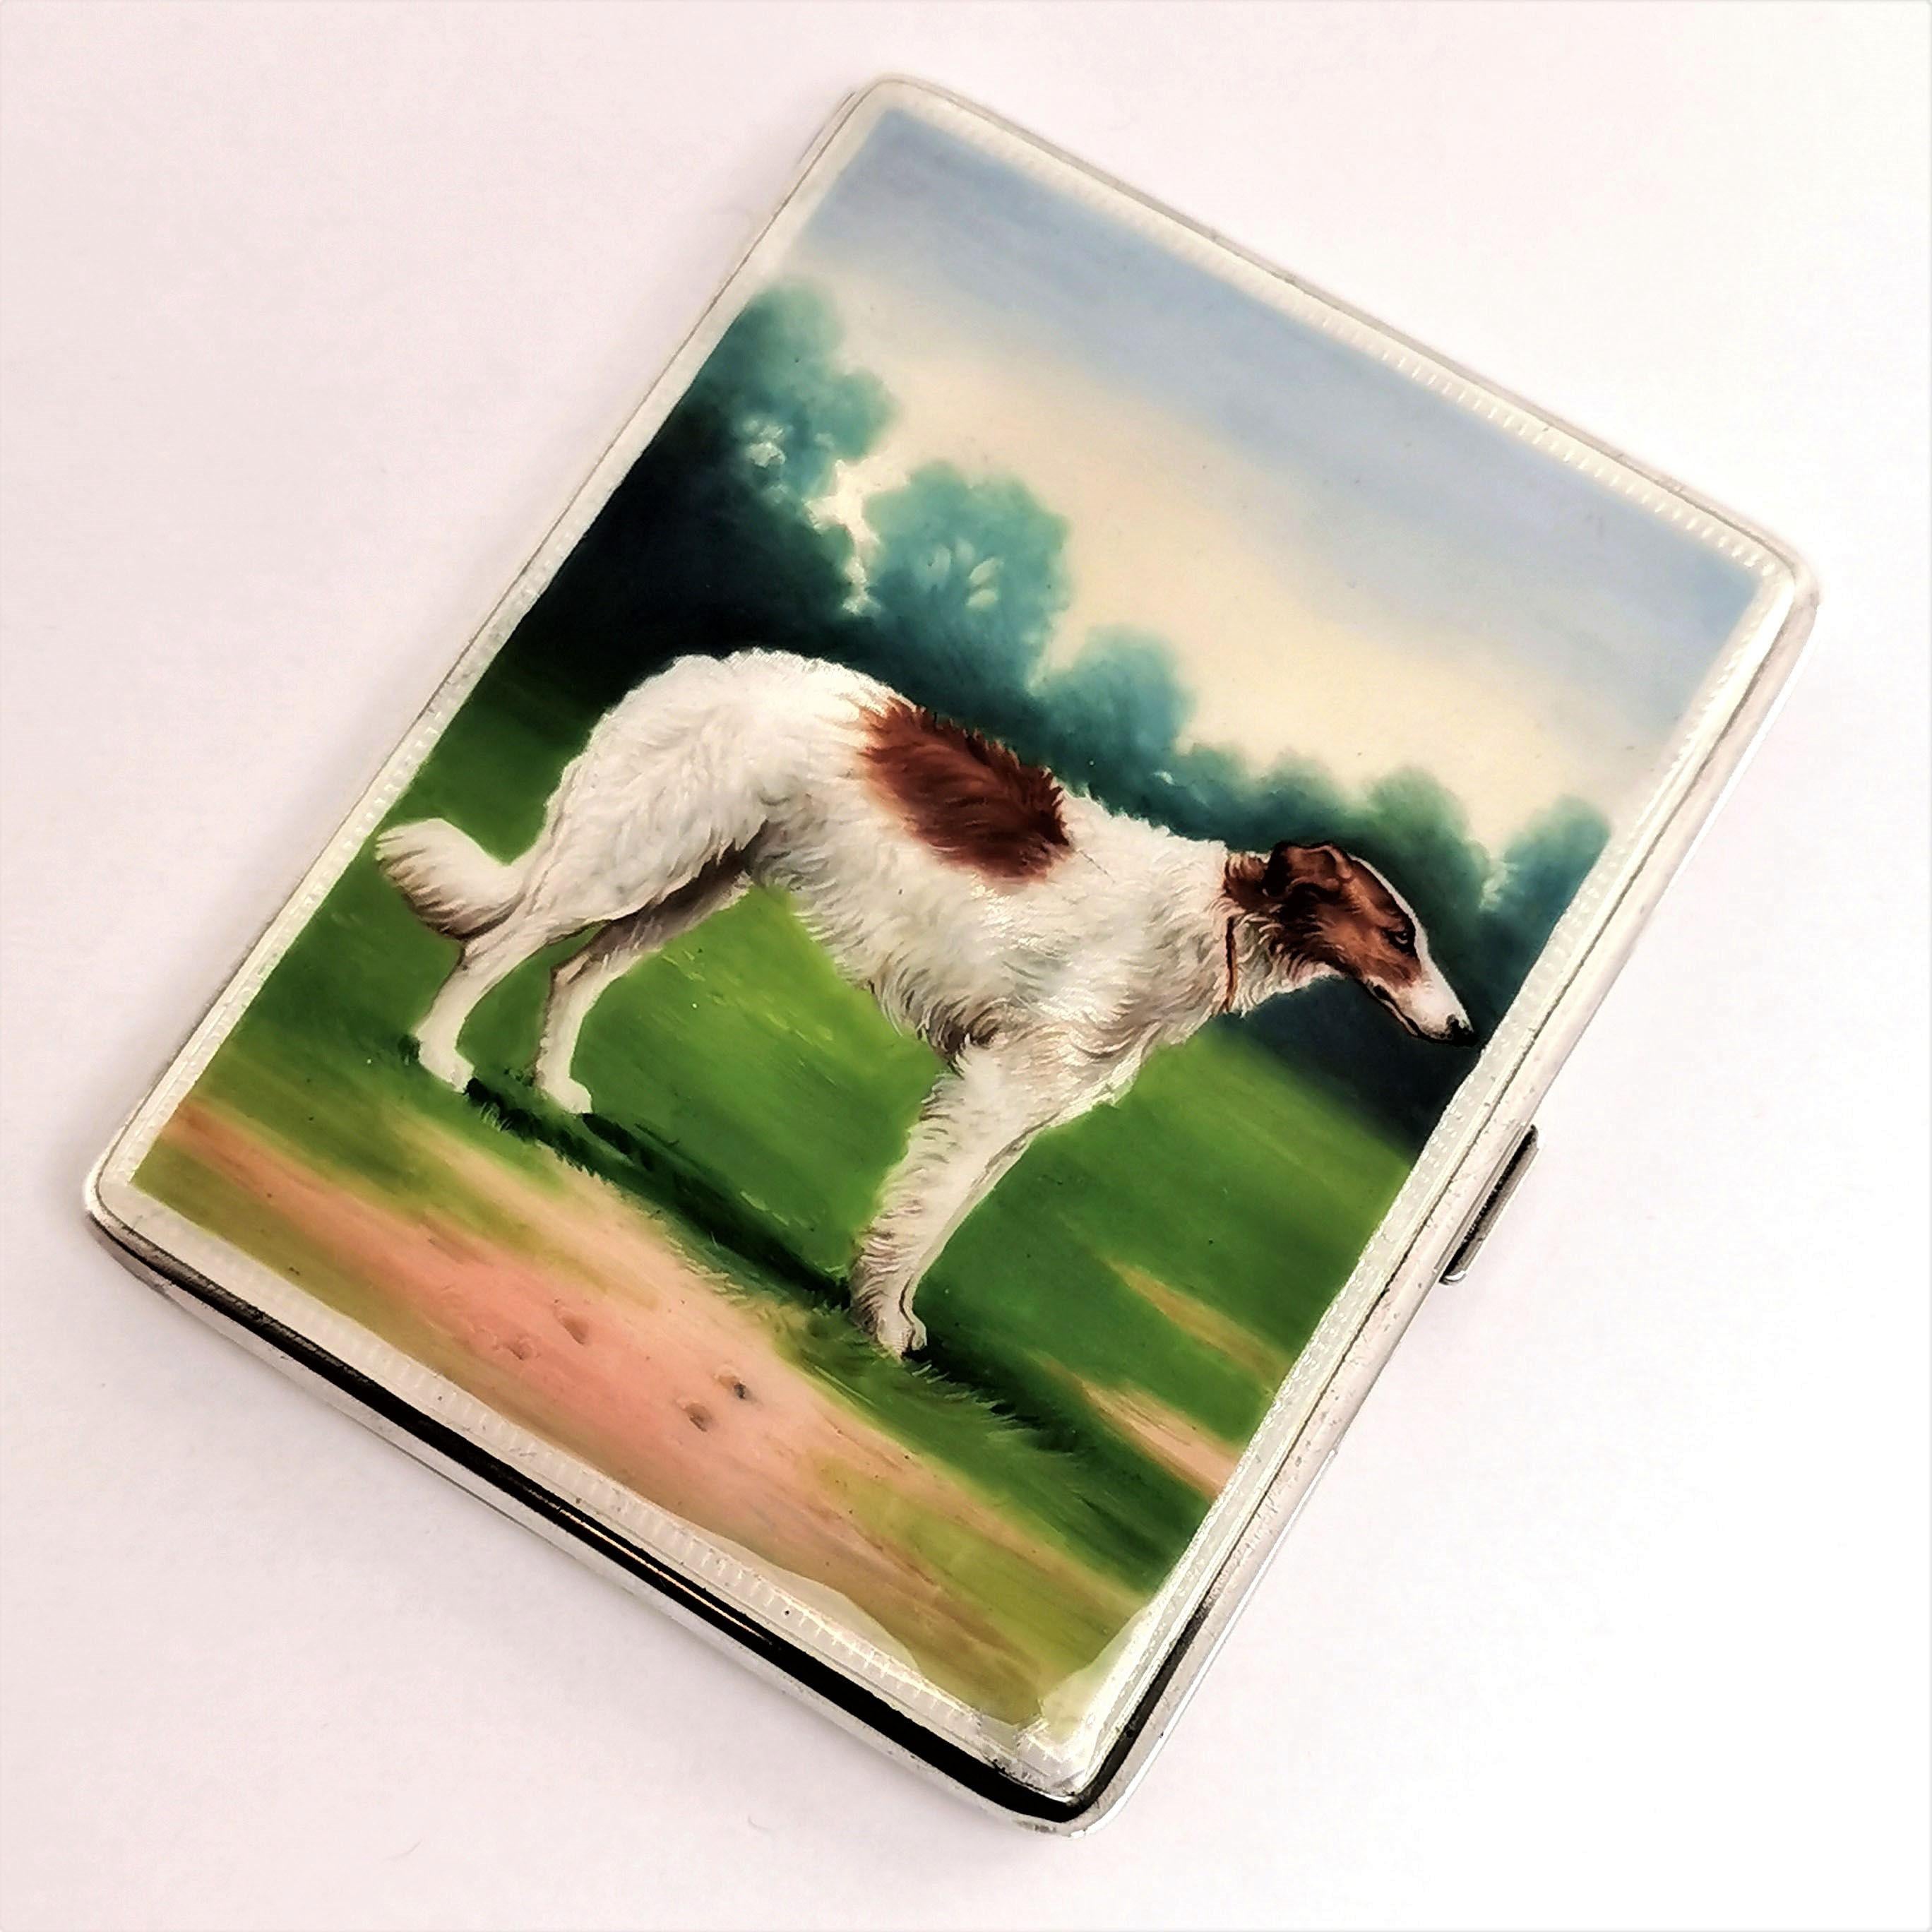 A gorgeous vintage solid silver and enamel cigarette case featuring a beautiful enamel image of a dog on the cover. The image is created in deep, rich colors and with a wonderful attention to detail. The images shows a hunting dog, possibly a Borzoi